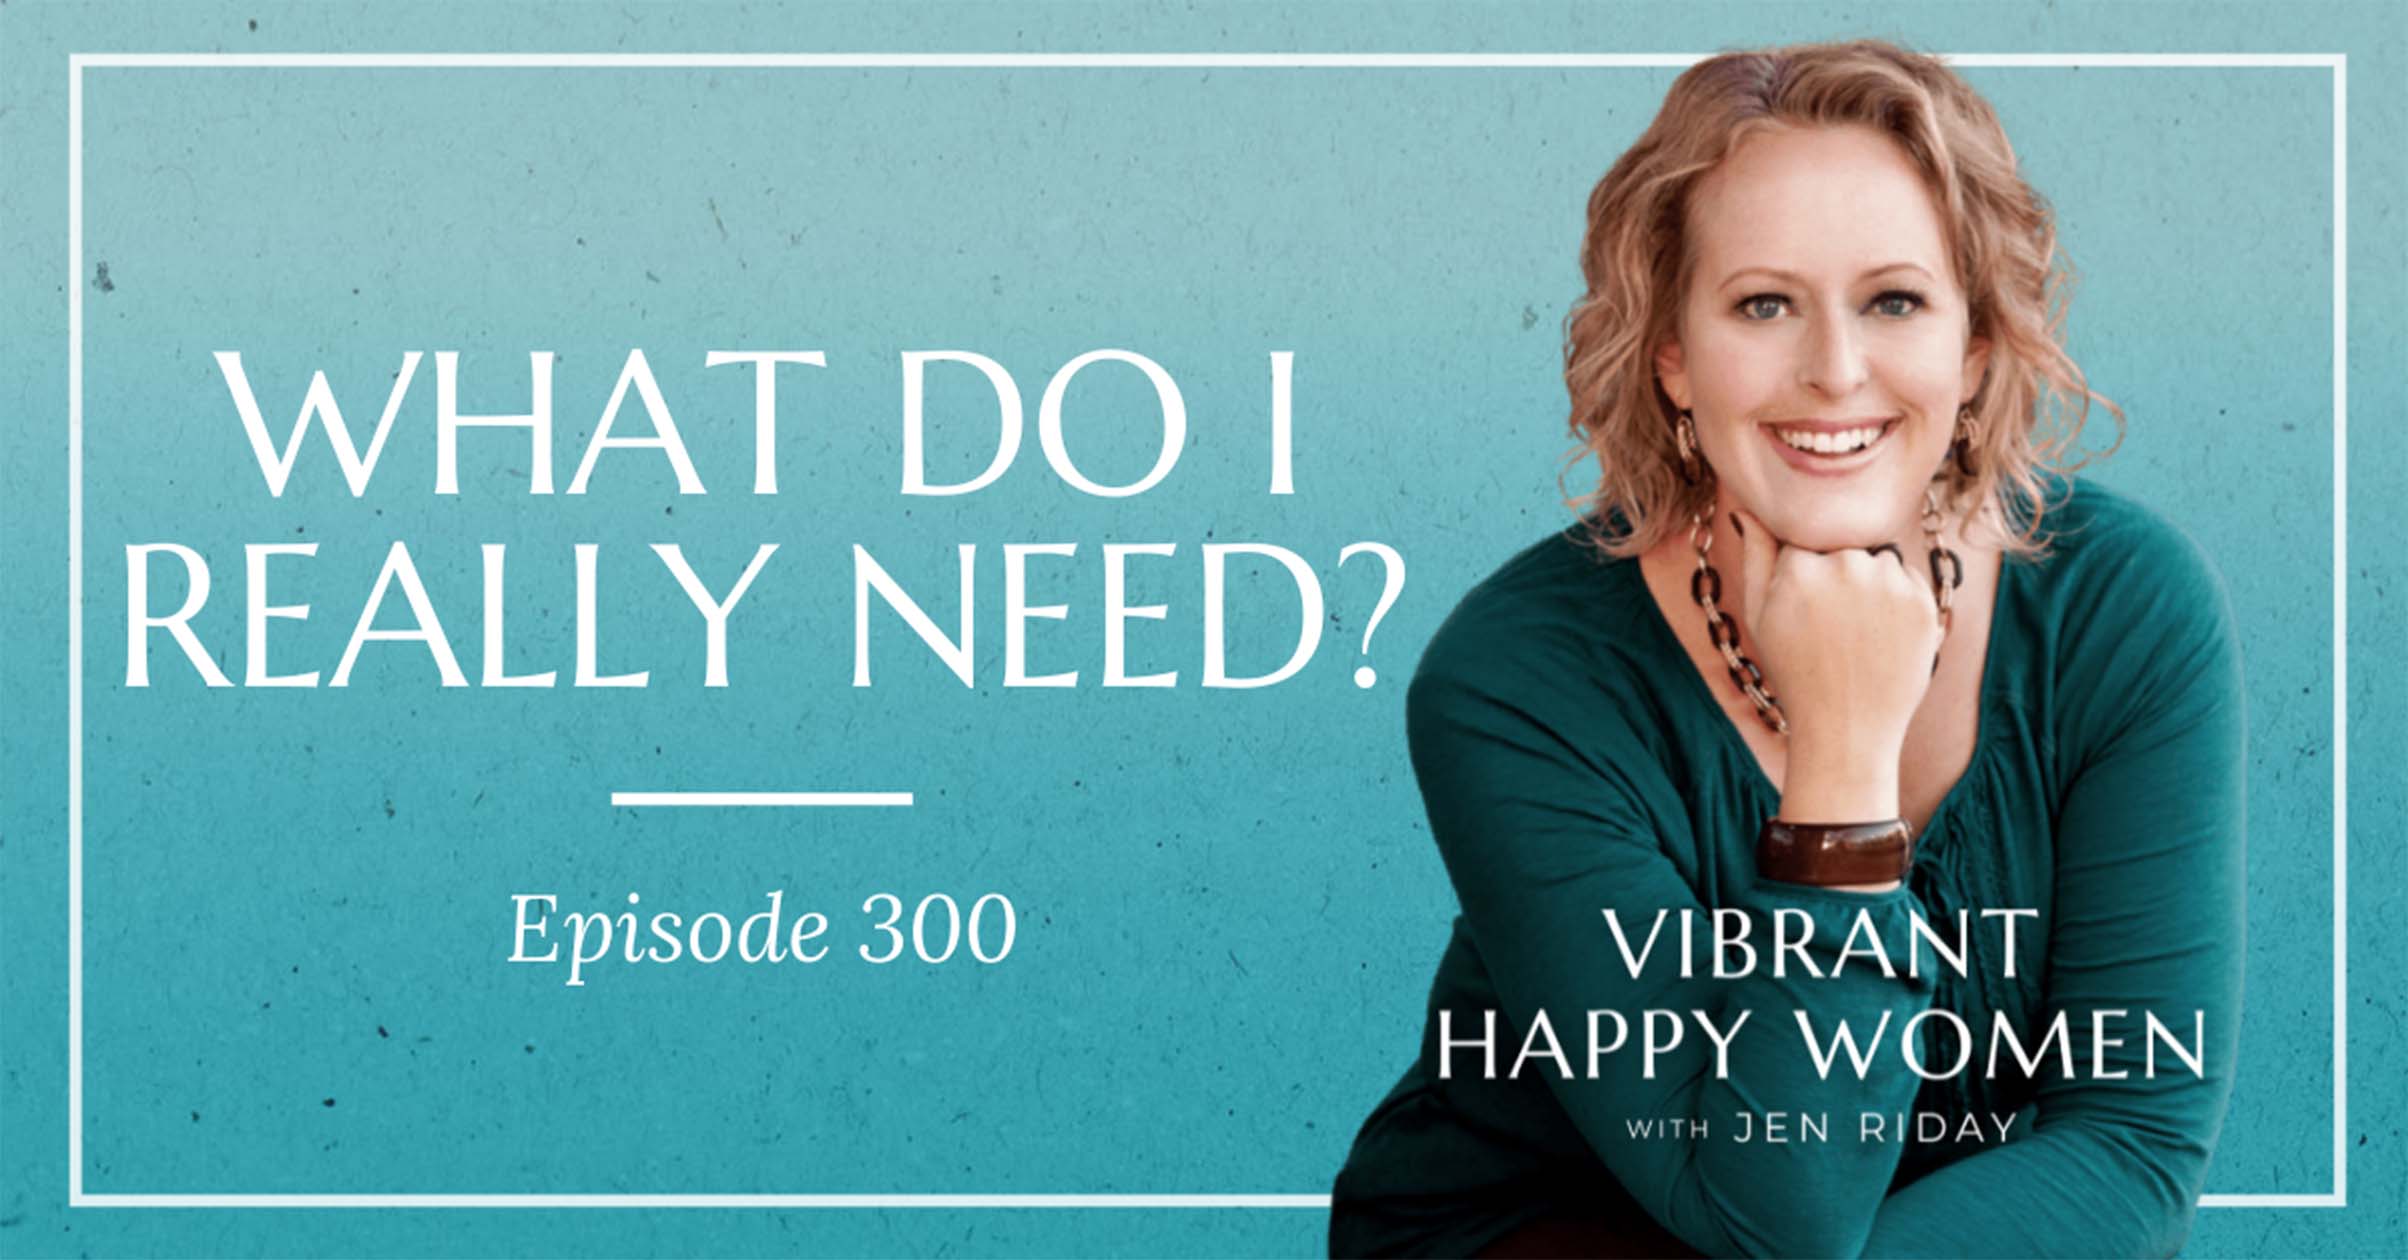 Vibrant Happy Women with Dr. Jen Riday | What Do I Really Need?